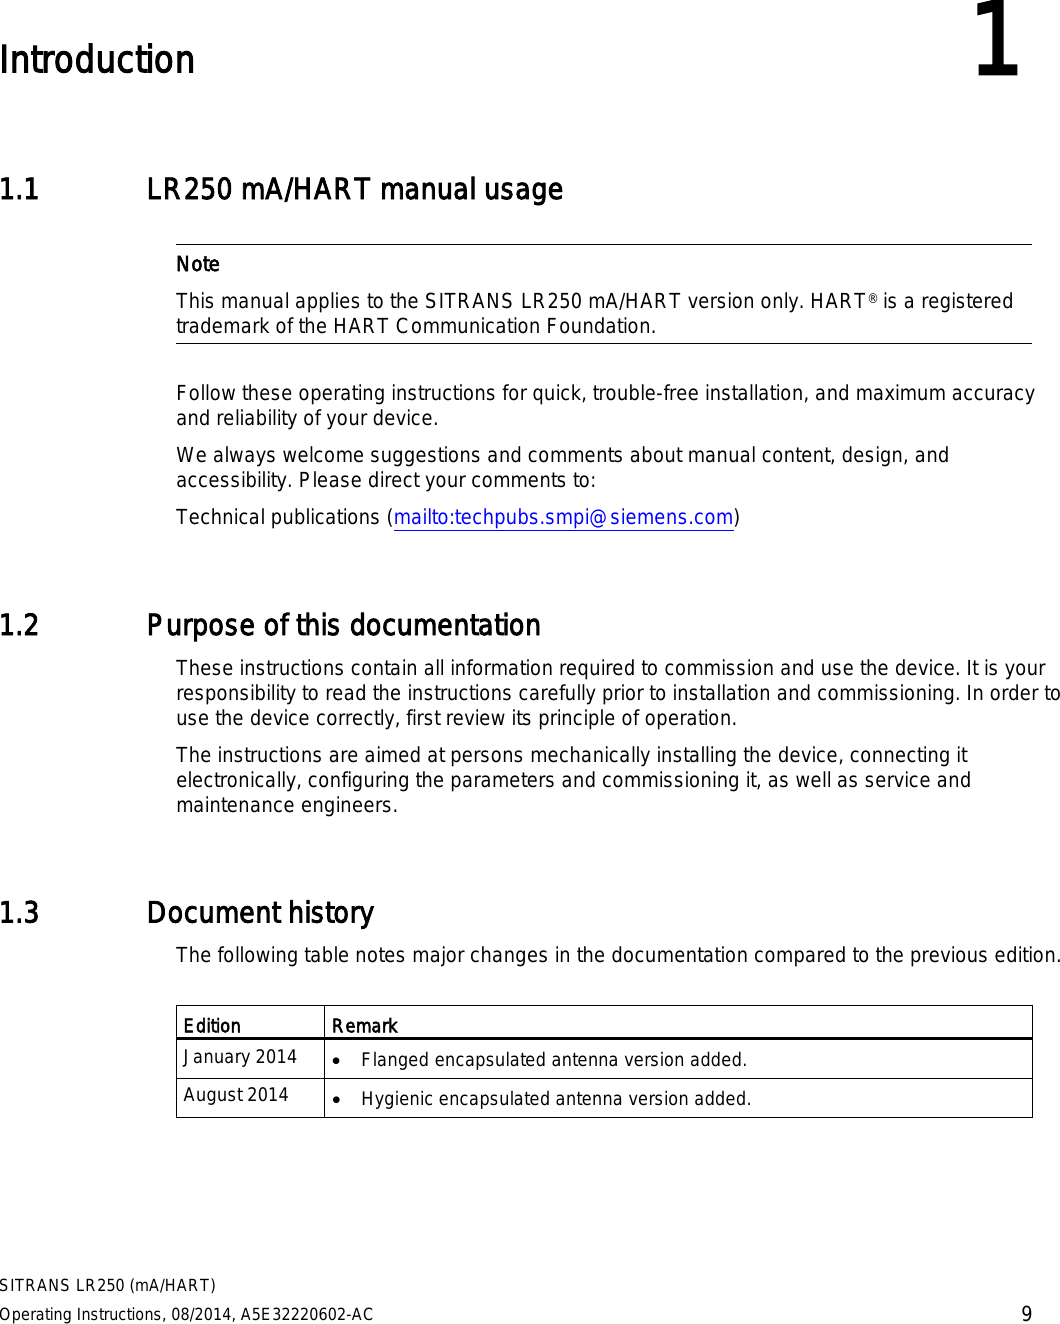  SITRANS LR250 (mA/HART) Operating Instructions, 08/2014, A5E32220602-AC 9  Introduction 1 1.1 LR250 mA/HART manual usage   Note This manual applies to the SITRANS LR250 mA/HART version only. HART® is a registered trademark of the HART Communication Foundation.  Follow these operating instructions for quick, trouble-free installation, and maximum accuracy and reliability of your device.  We always welcome suggestions and comments about manual content, design, and accessibility. Please direct your comments to: Technical publications (mailto:techpubs.smpi@siemens.com)  1.2 Purpose of this documentation These instructions contain all information required to commission and use the device. It is your responsibility to read the instructions carefully prior to installation and commissioning. In order to use the device correctly, first review its principle of operation. The instructions are aimed at persons mechanically installing the device, connecting it electronically, configuring the parameters and commissioning it, as well as service and maintenance engineers. 1.3 Document history The following table notes major changes in the documentation compared to the previous edition.  Edition Remark January 2014 • Flanged encapsulated antenna version added. August 2014 • Hygienic encapsulated antenna version added. 